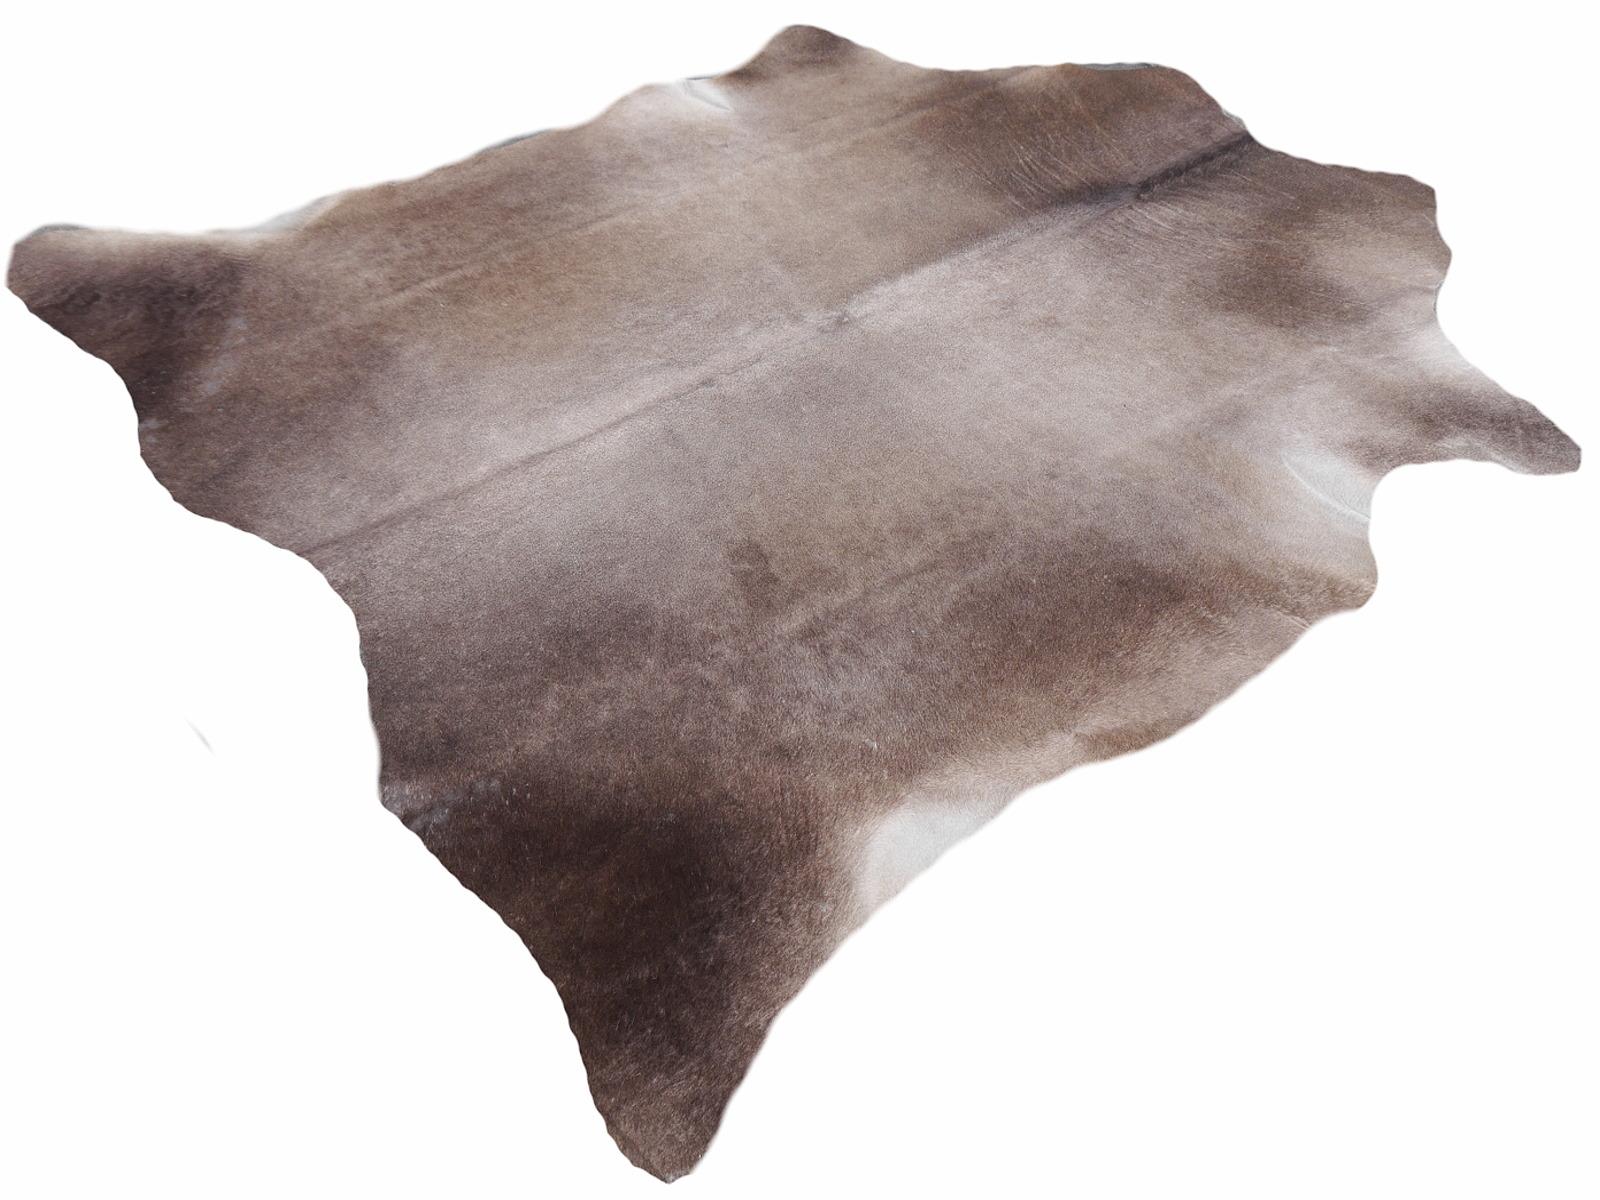 Large cowhide rug brown

Our premium cowhides are of excellent quality, all hand selected. They go great with many decor styles such as South Western, industrial, midcentury, Hollywood Regency and contemporary modern. All our cowhide rugs are